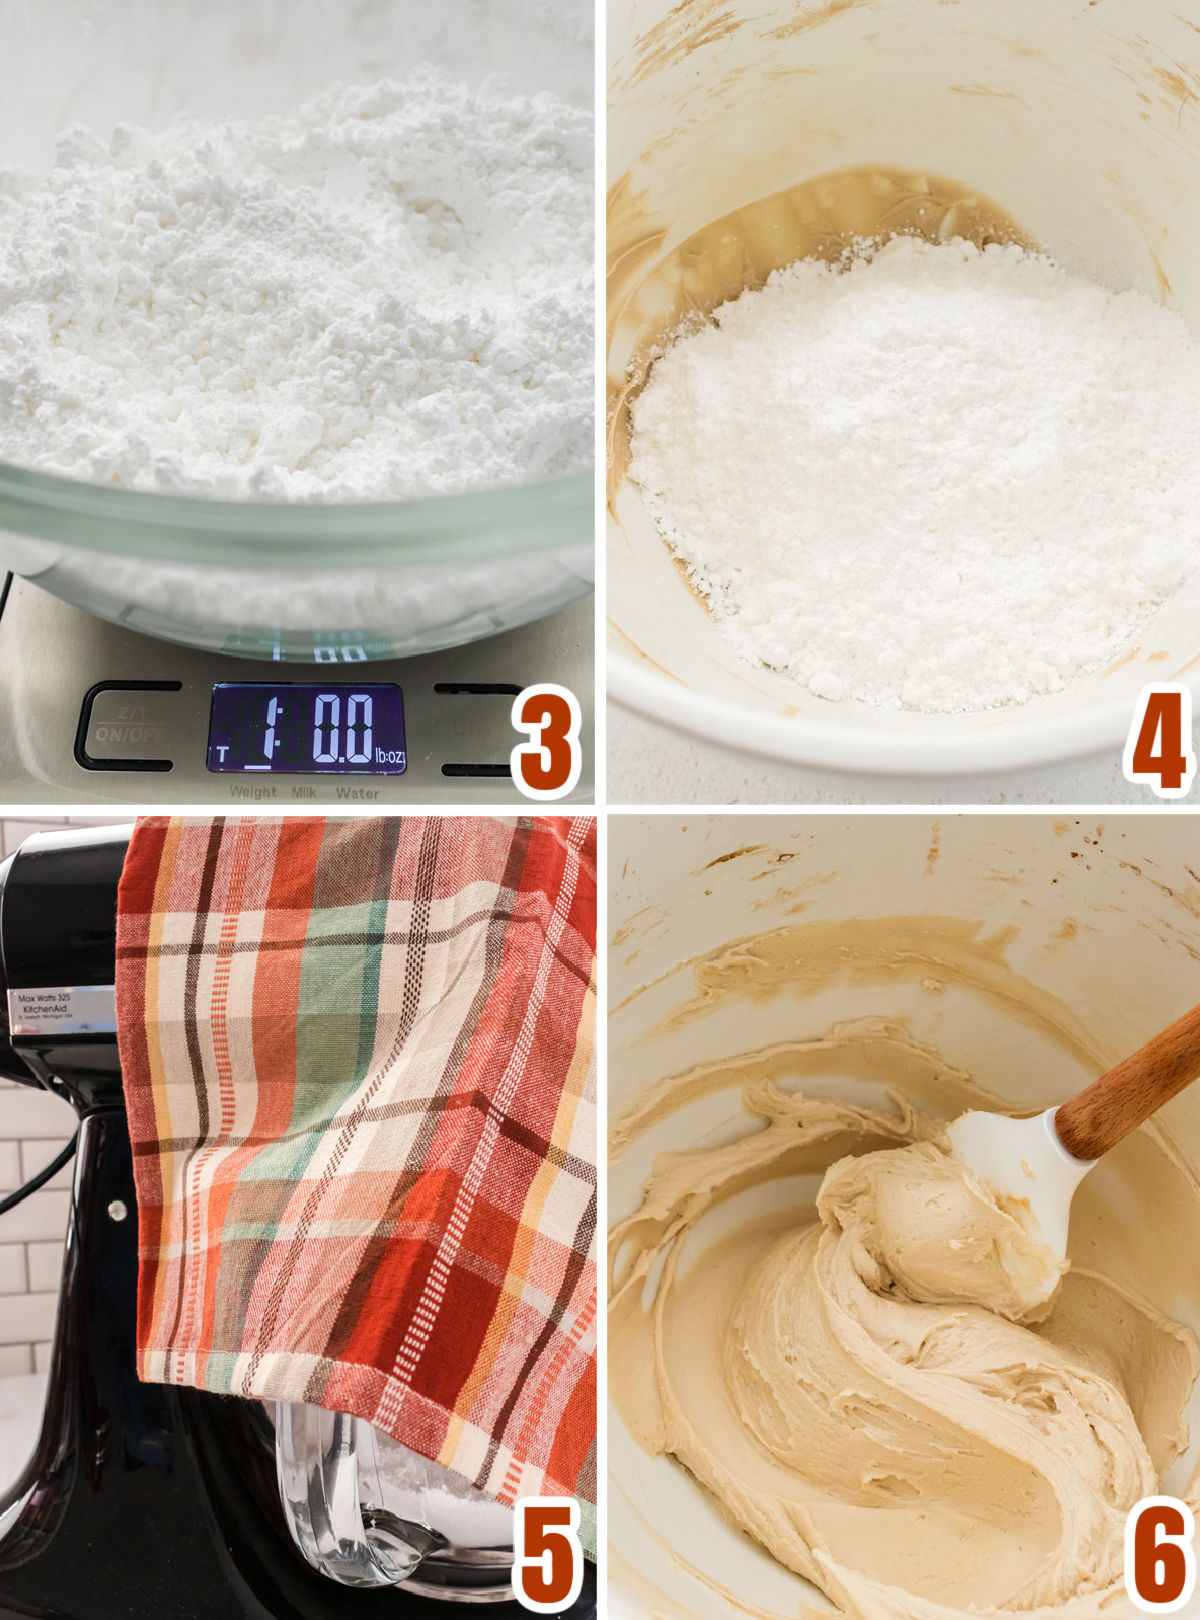 Collage image showing the steps for adding the powdered sugar to the maple frosting.